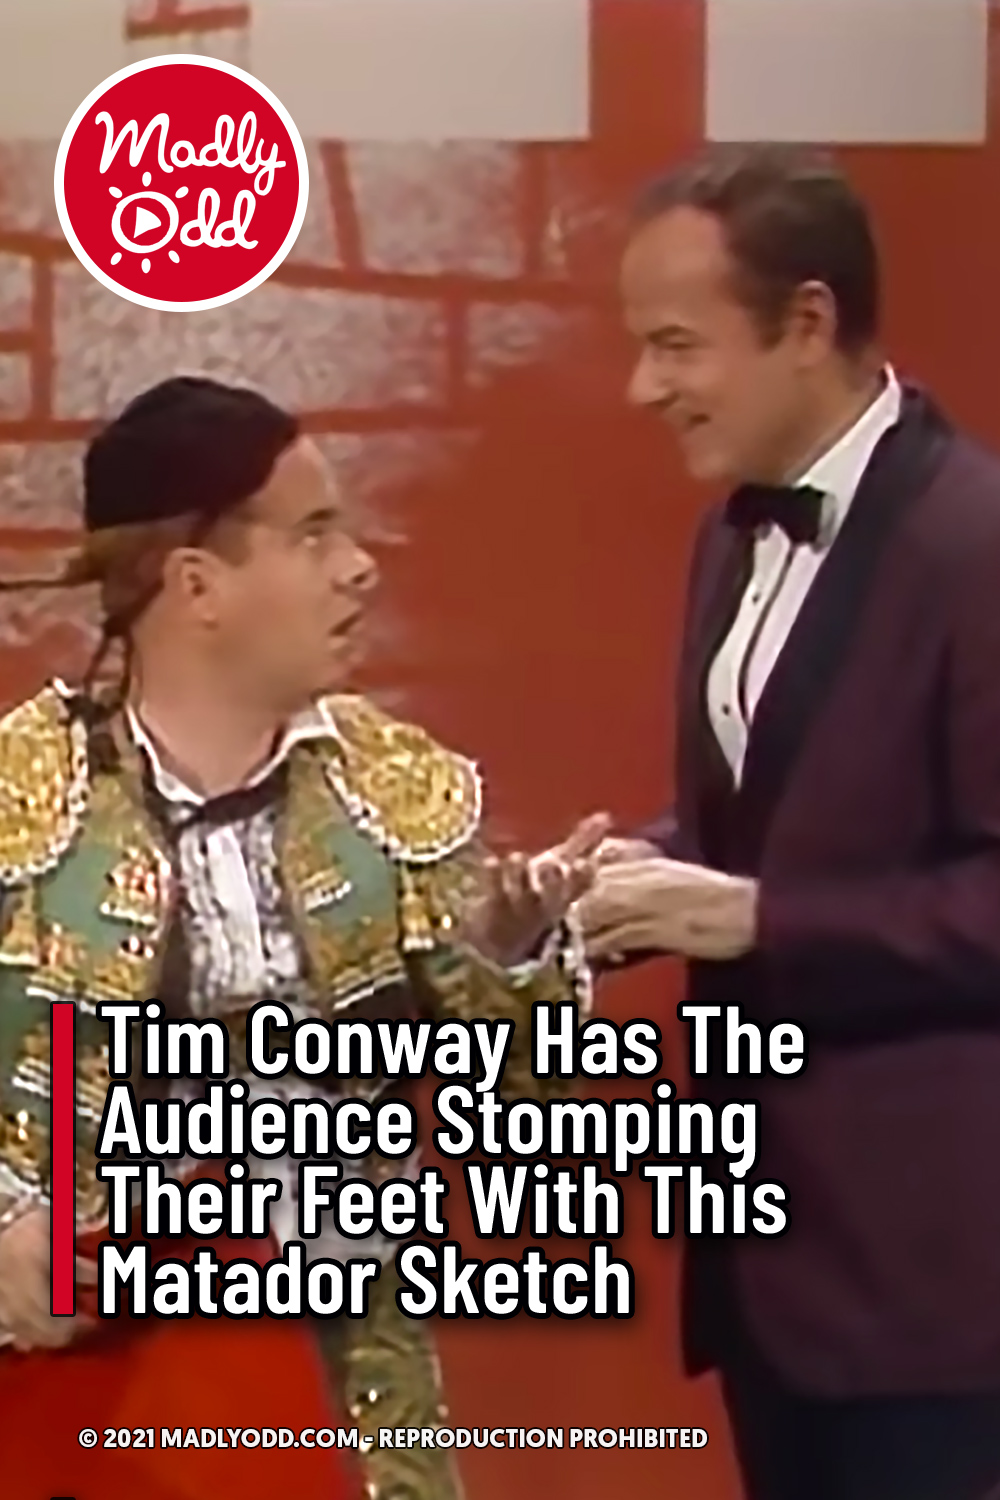 Tim Conway Has The Audience Stomping Their Feet With This Matador Sketch